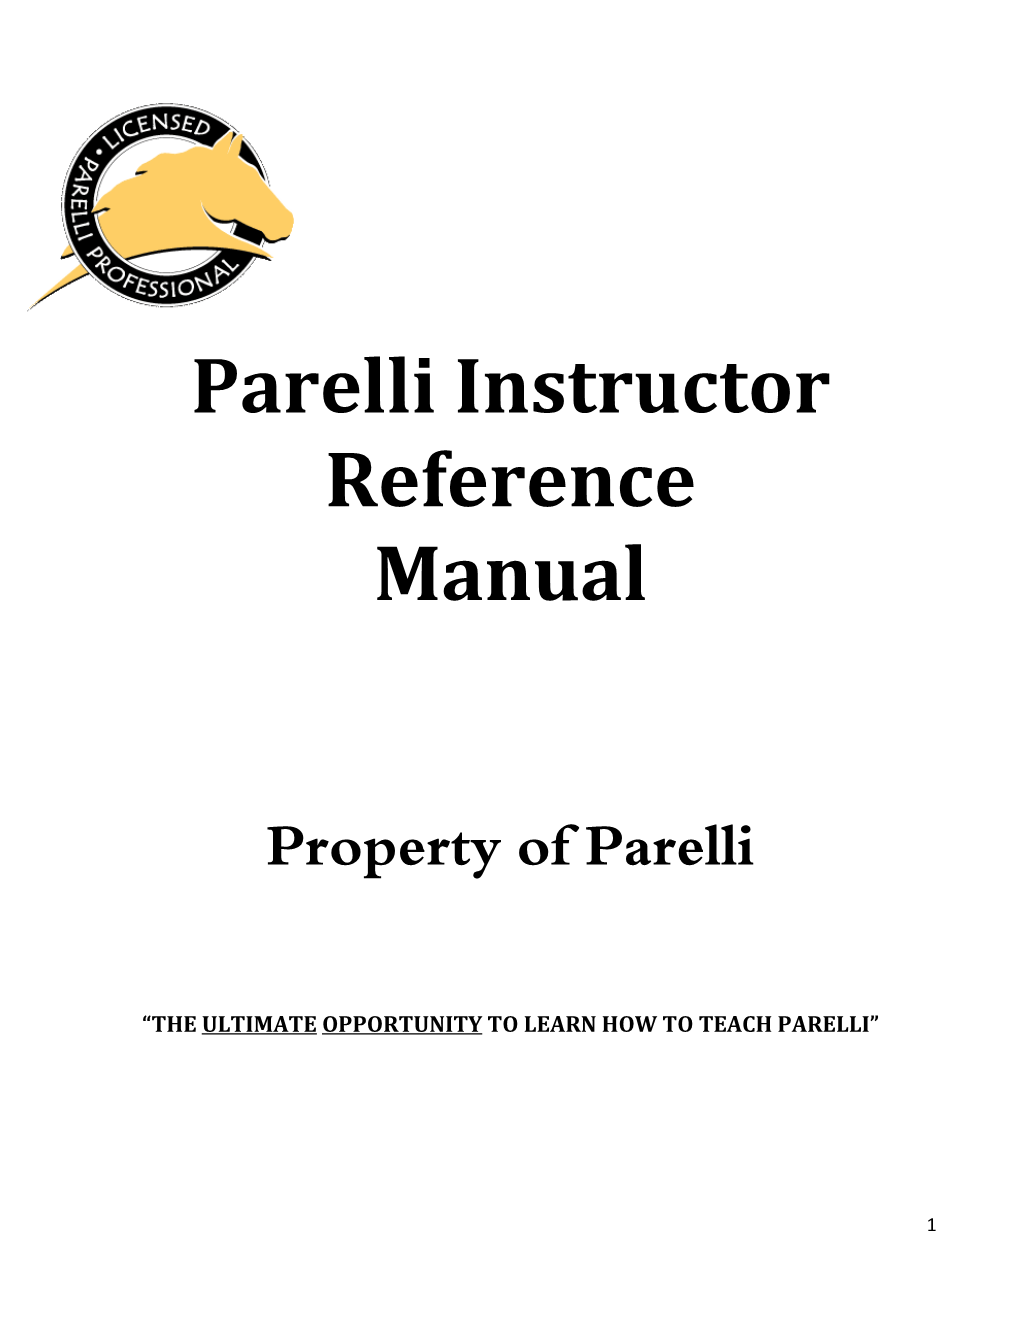 Parelli Instructor Reference Manual